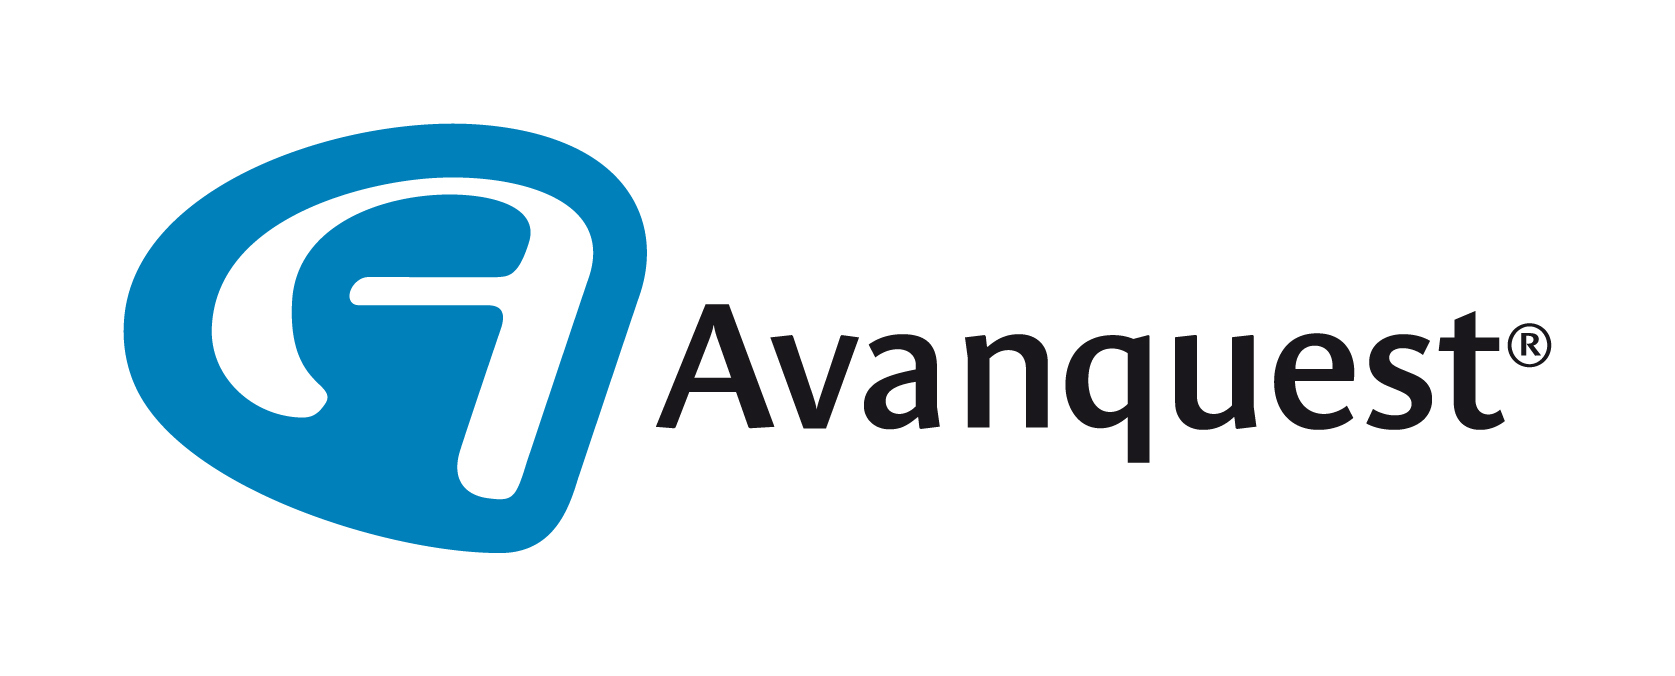 Avanquest nov 2017 6in1 must have aio h33tmigel